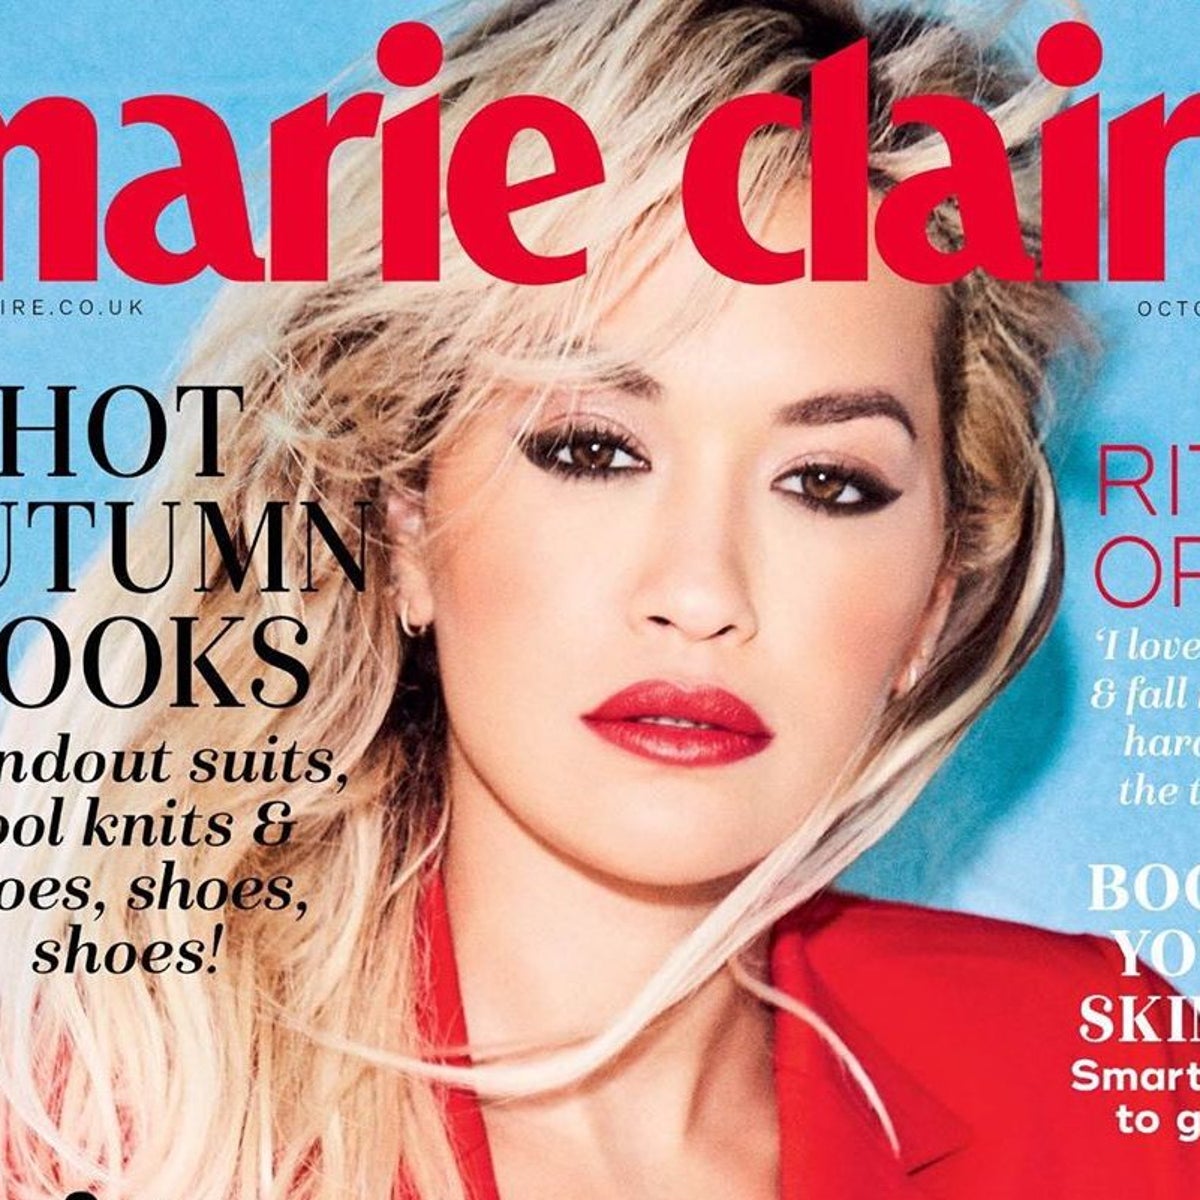 Marie Claire UK to close print magazine after 31 years of